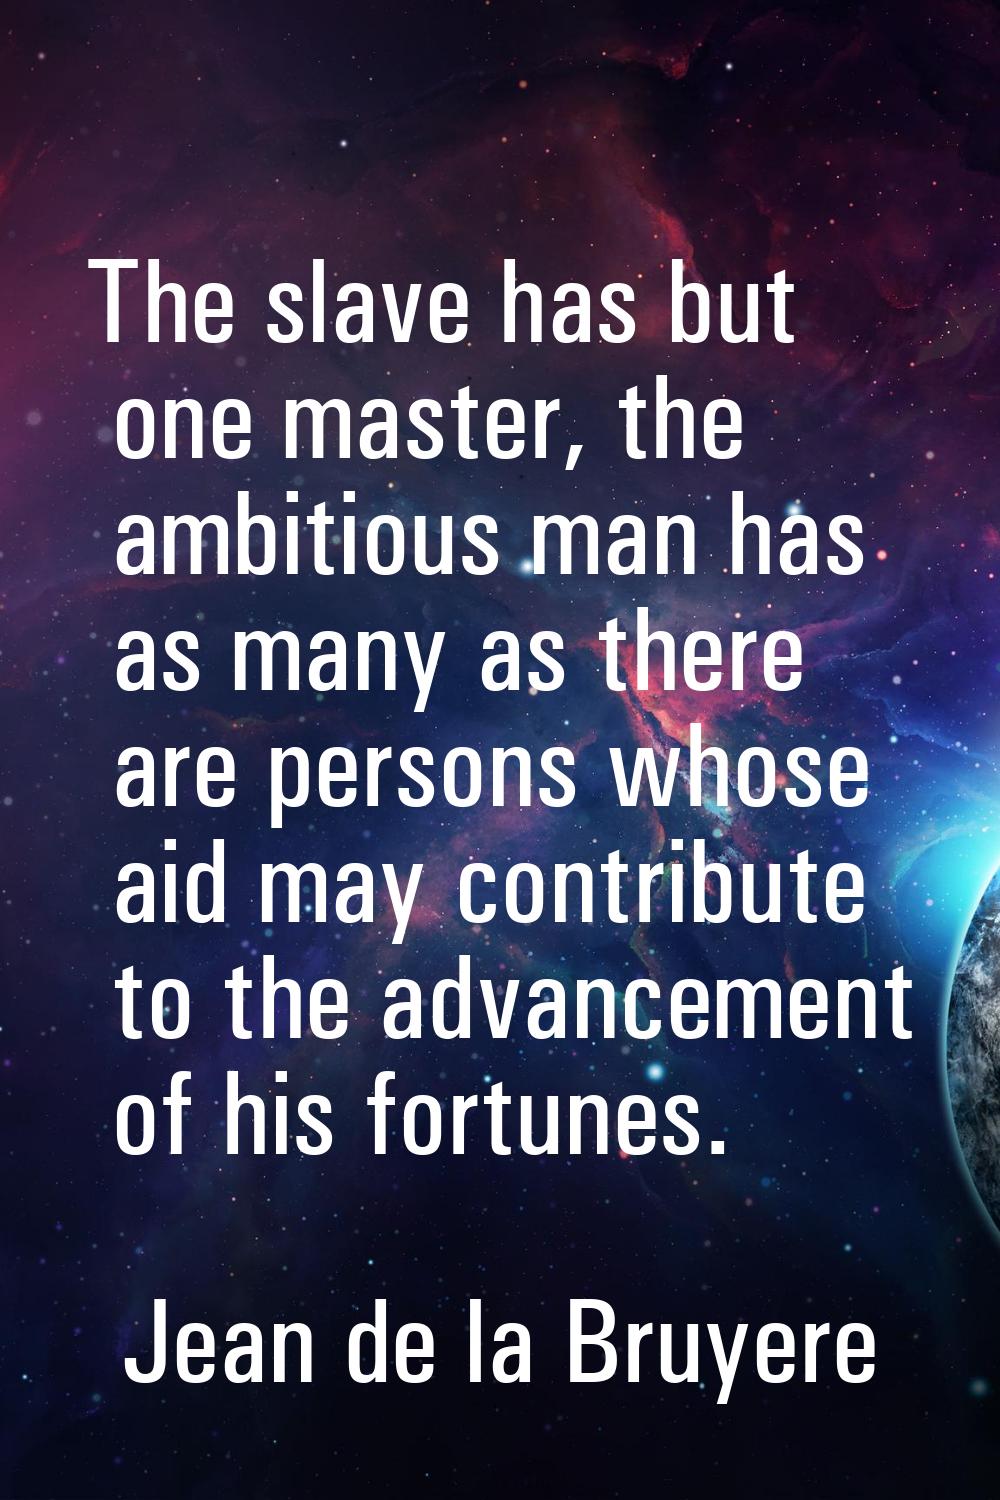 The slave has but one master, the ambitious man has as many as there are persons whose aid may cont